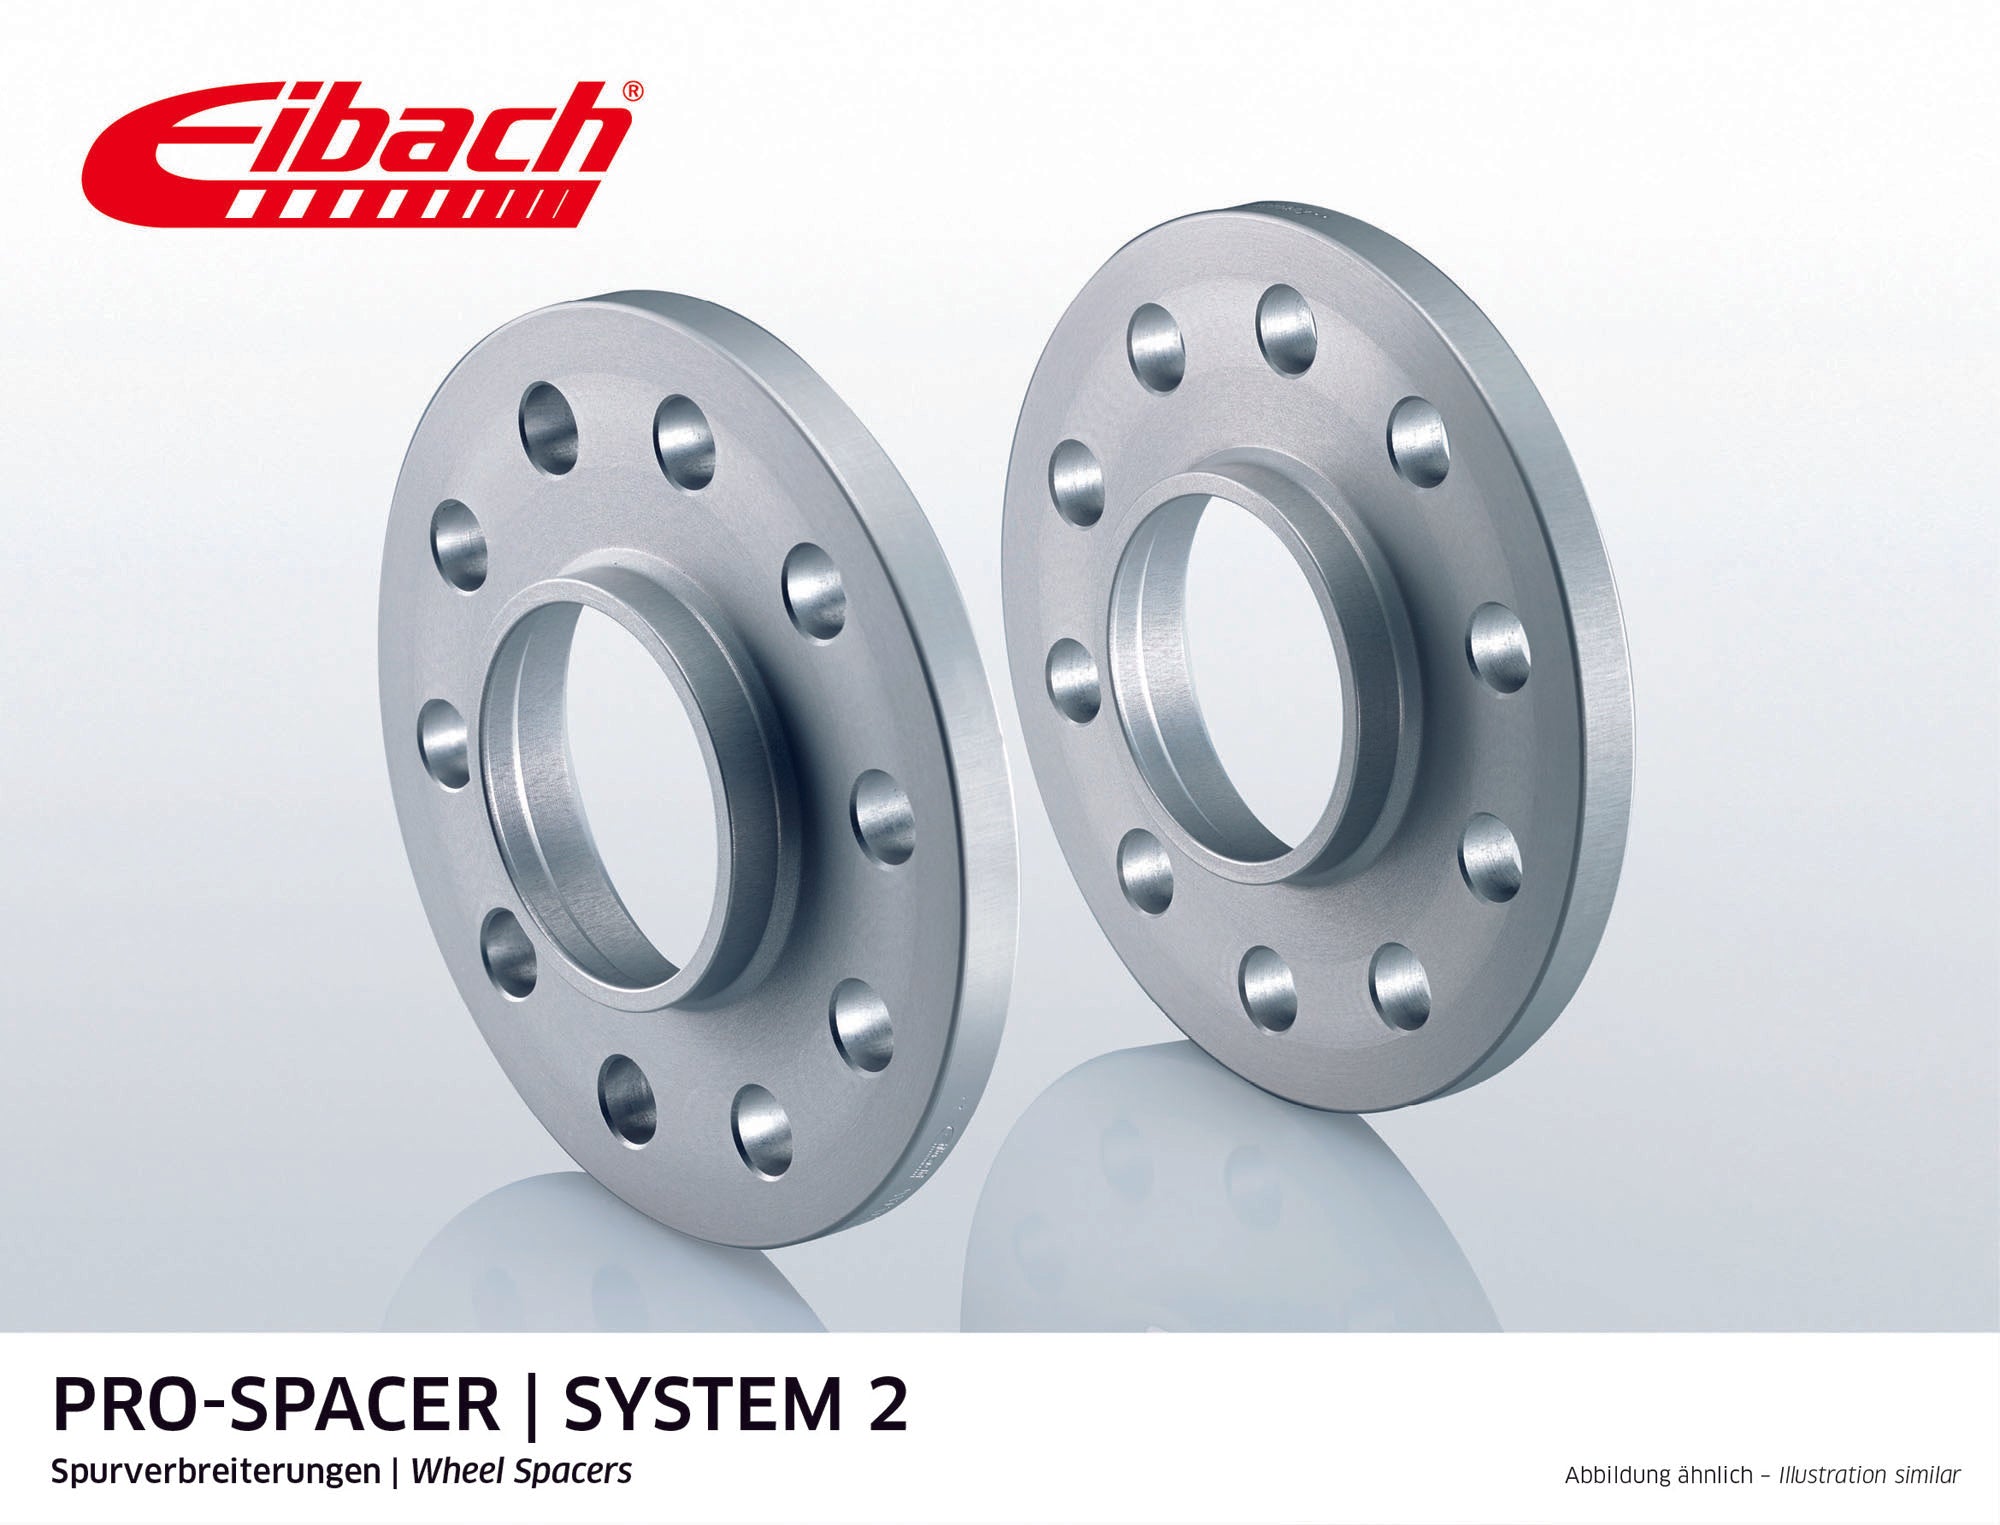 Eibach 18mm Pro-Spacer - Silver Anodized Wheel Spacer 911 2011-on #S90-2-18-001